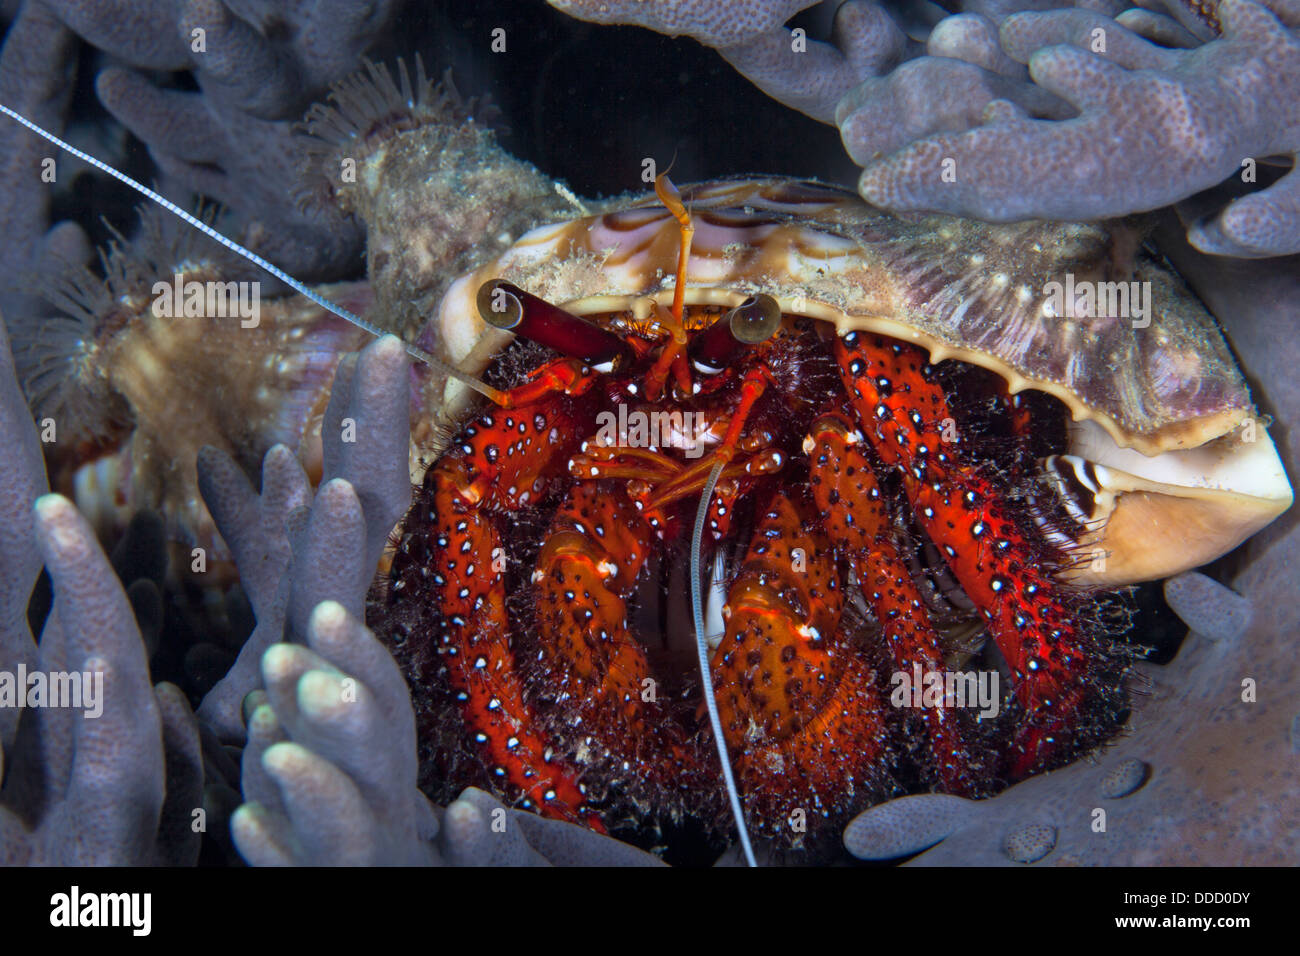 Red hermit crab with anemone on its shell hides in purple finger coral. Raja Ampat, Indonesia. Stock Photo